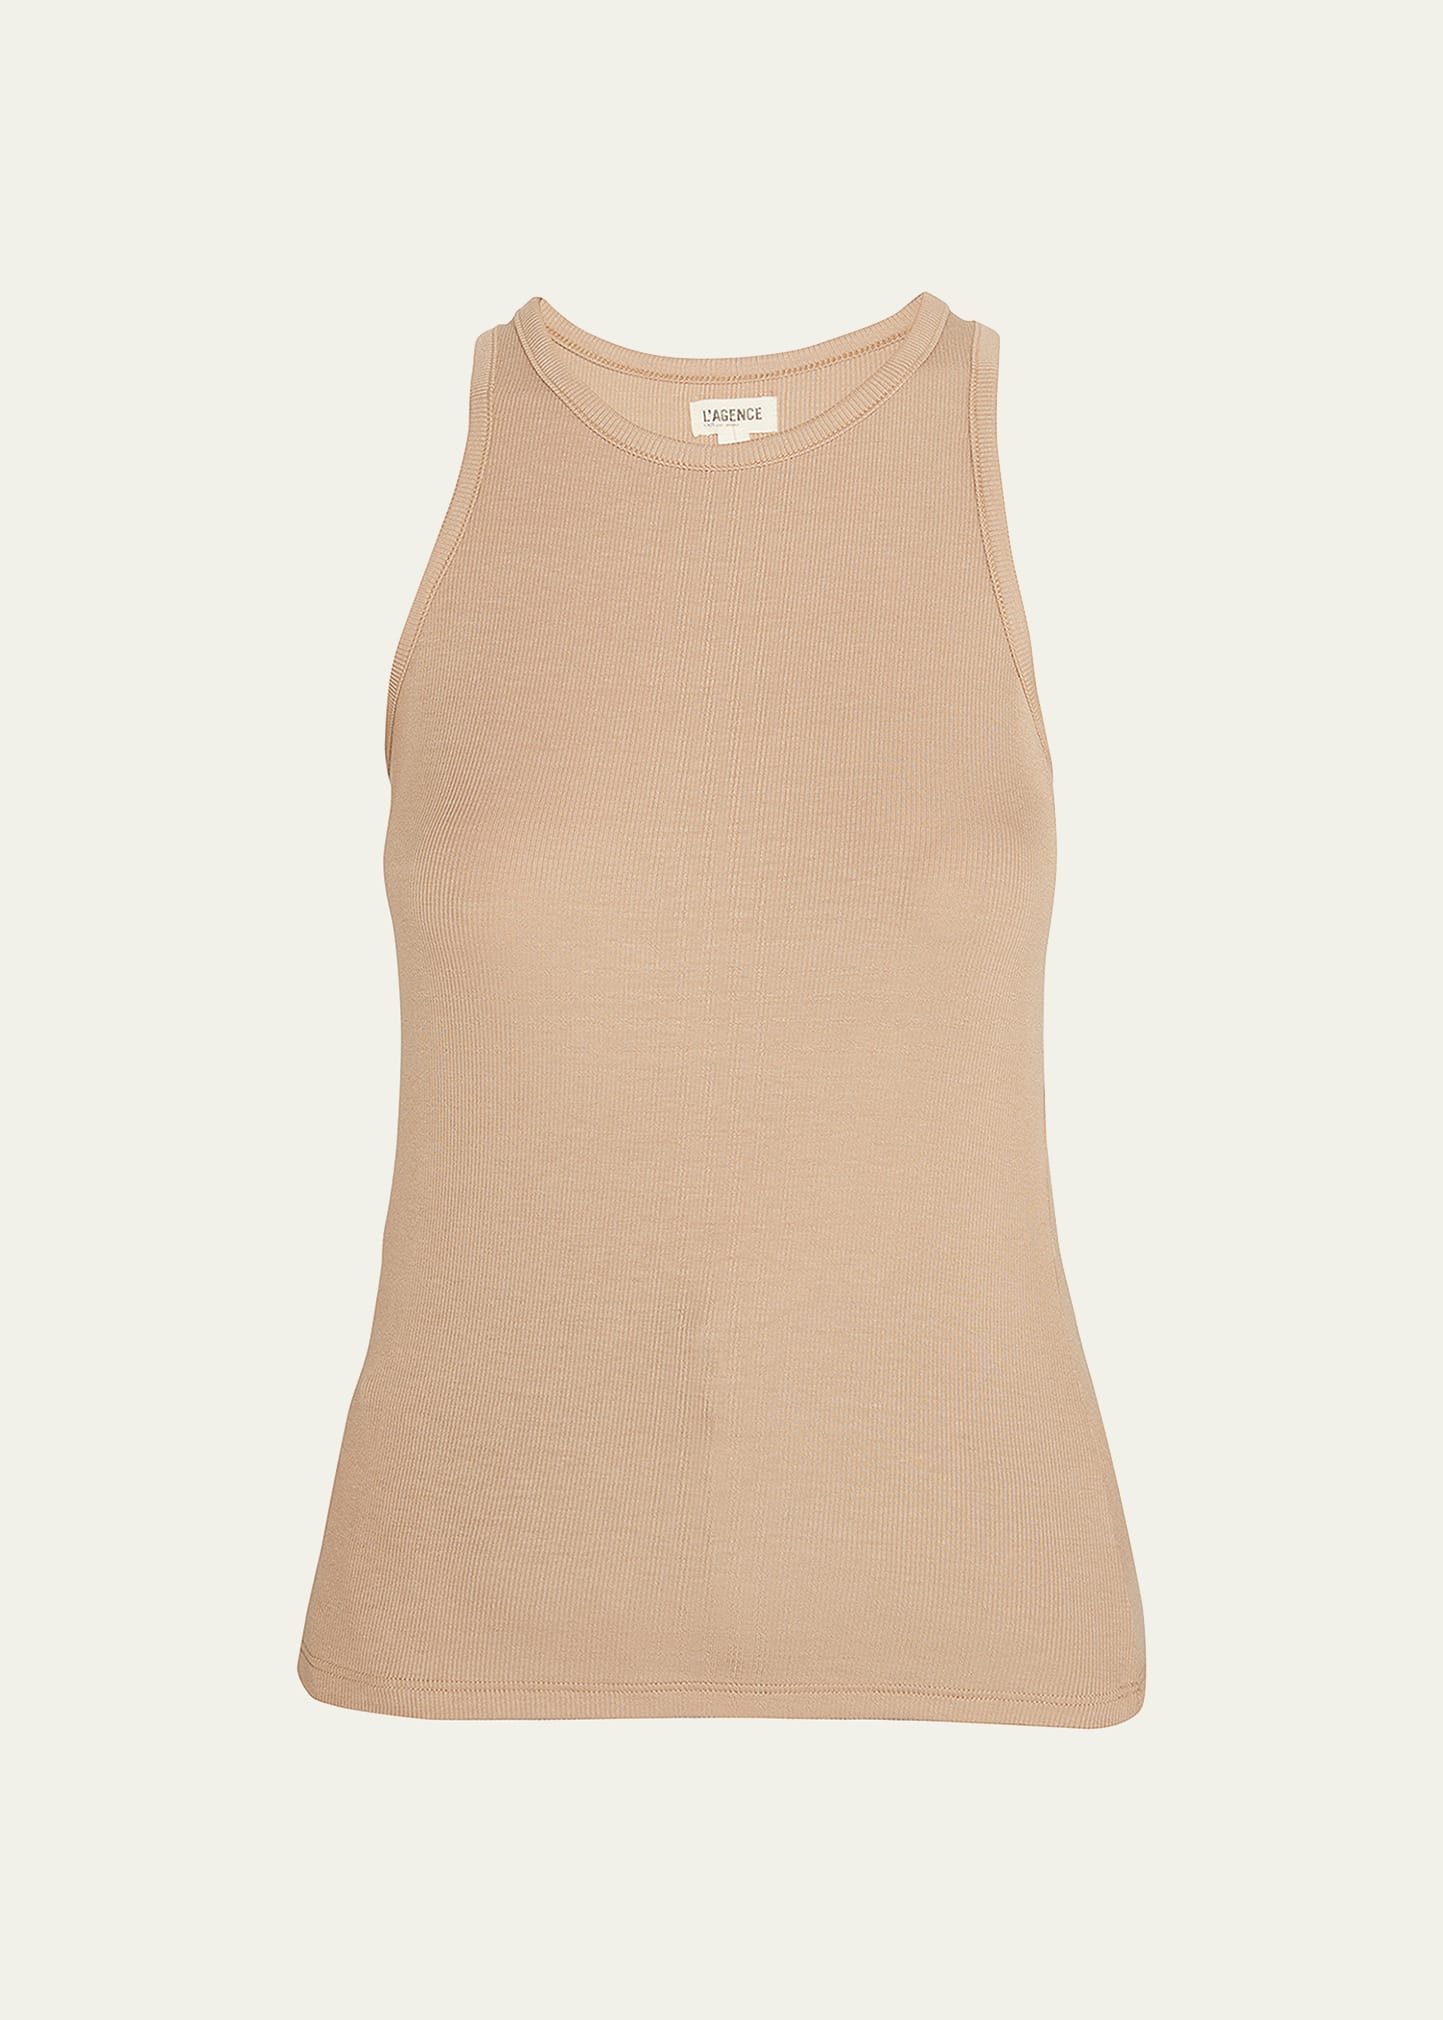 L Agence Nia Racer Back Tank In Cappuccino